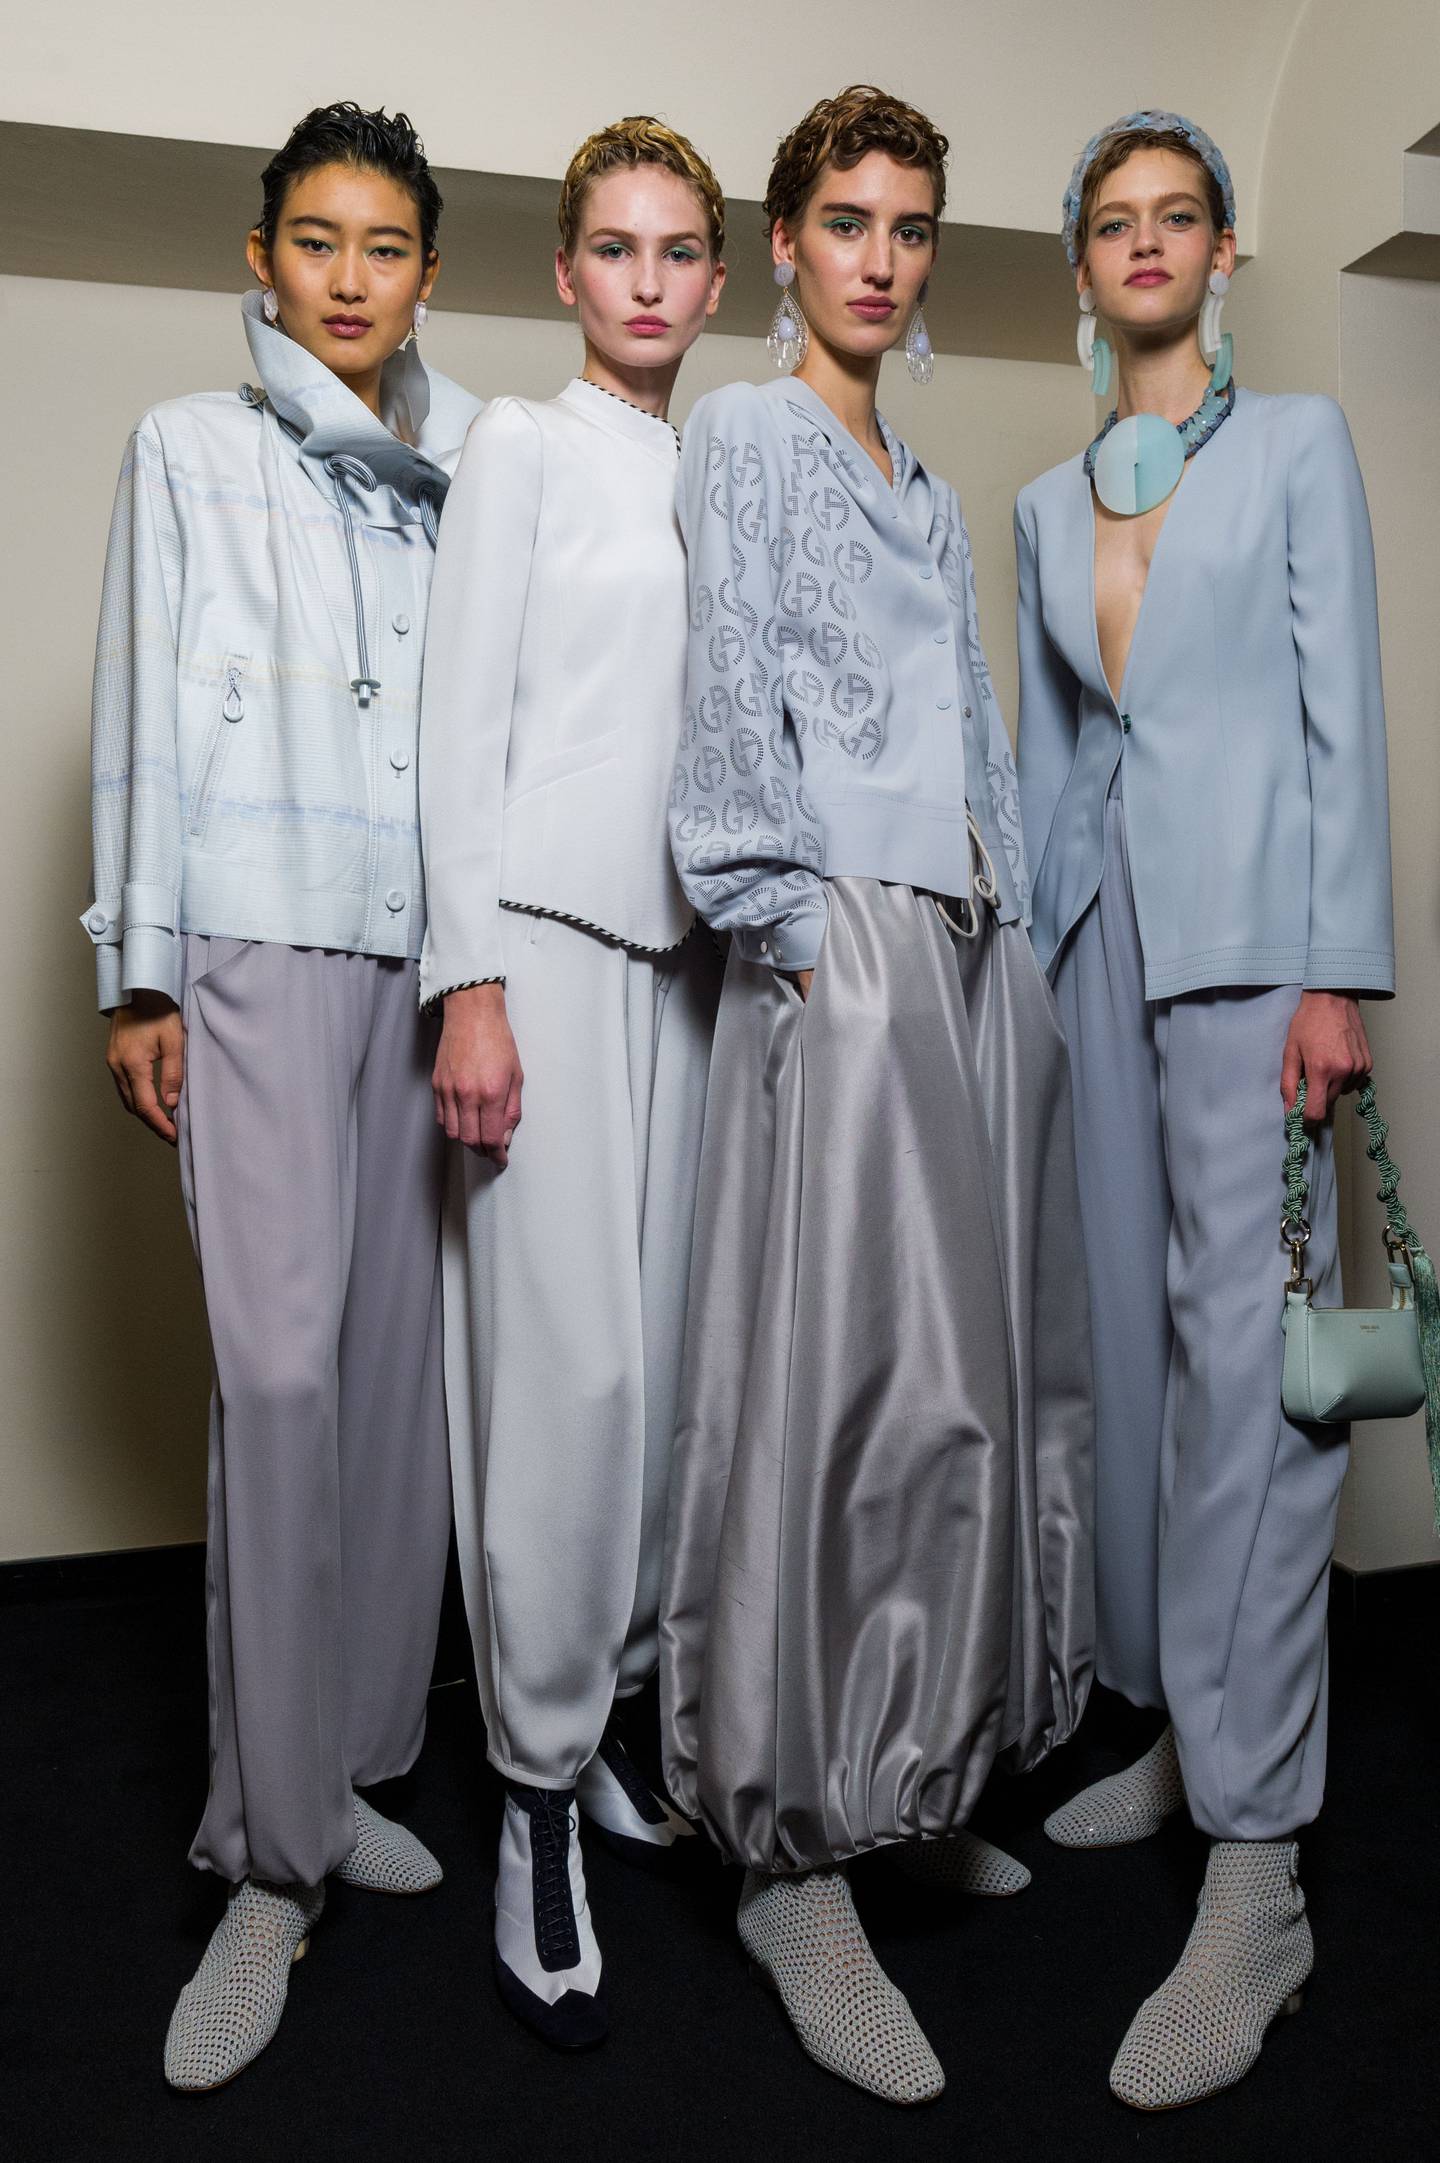 Armani’s spring/summer 2022 womenswear collection features easy-to-wear cuts in gentle pastel hues. Photo: Armani